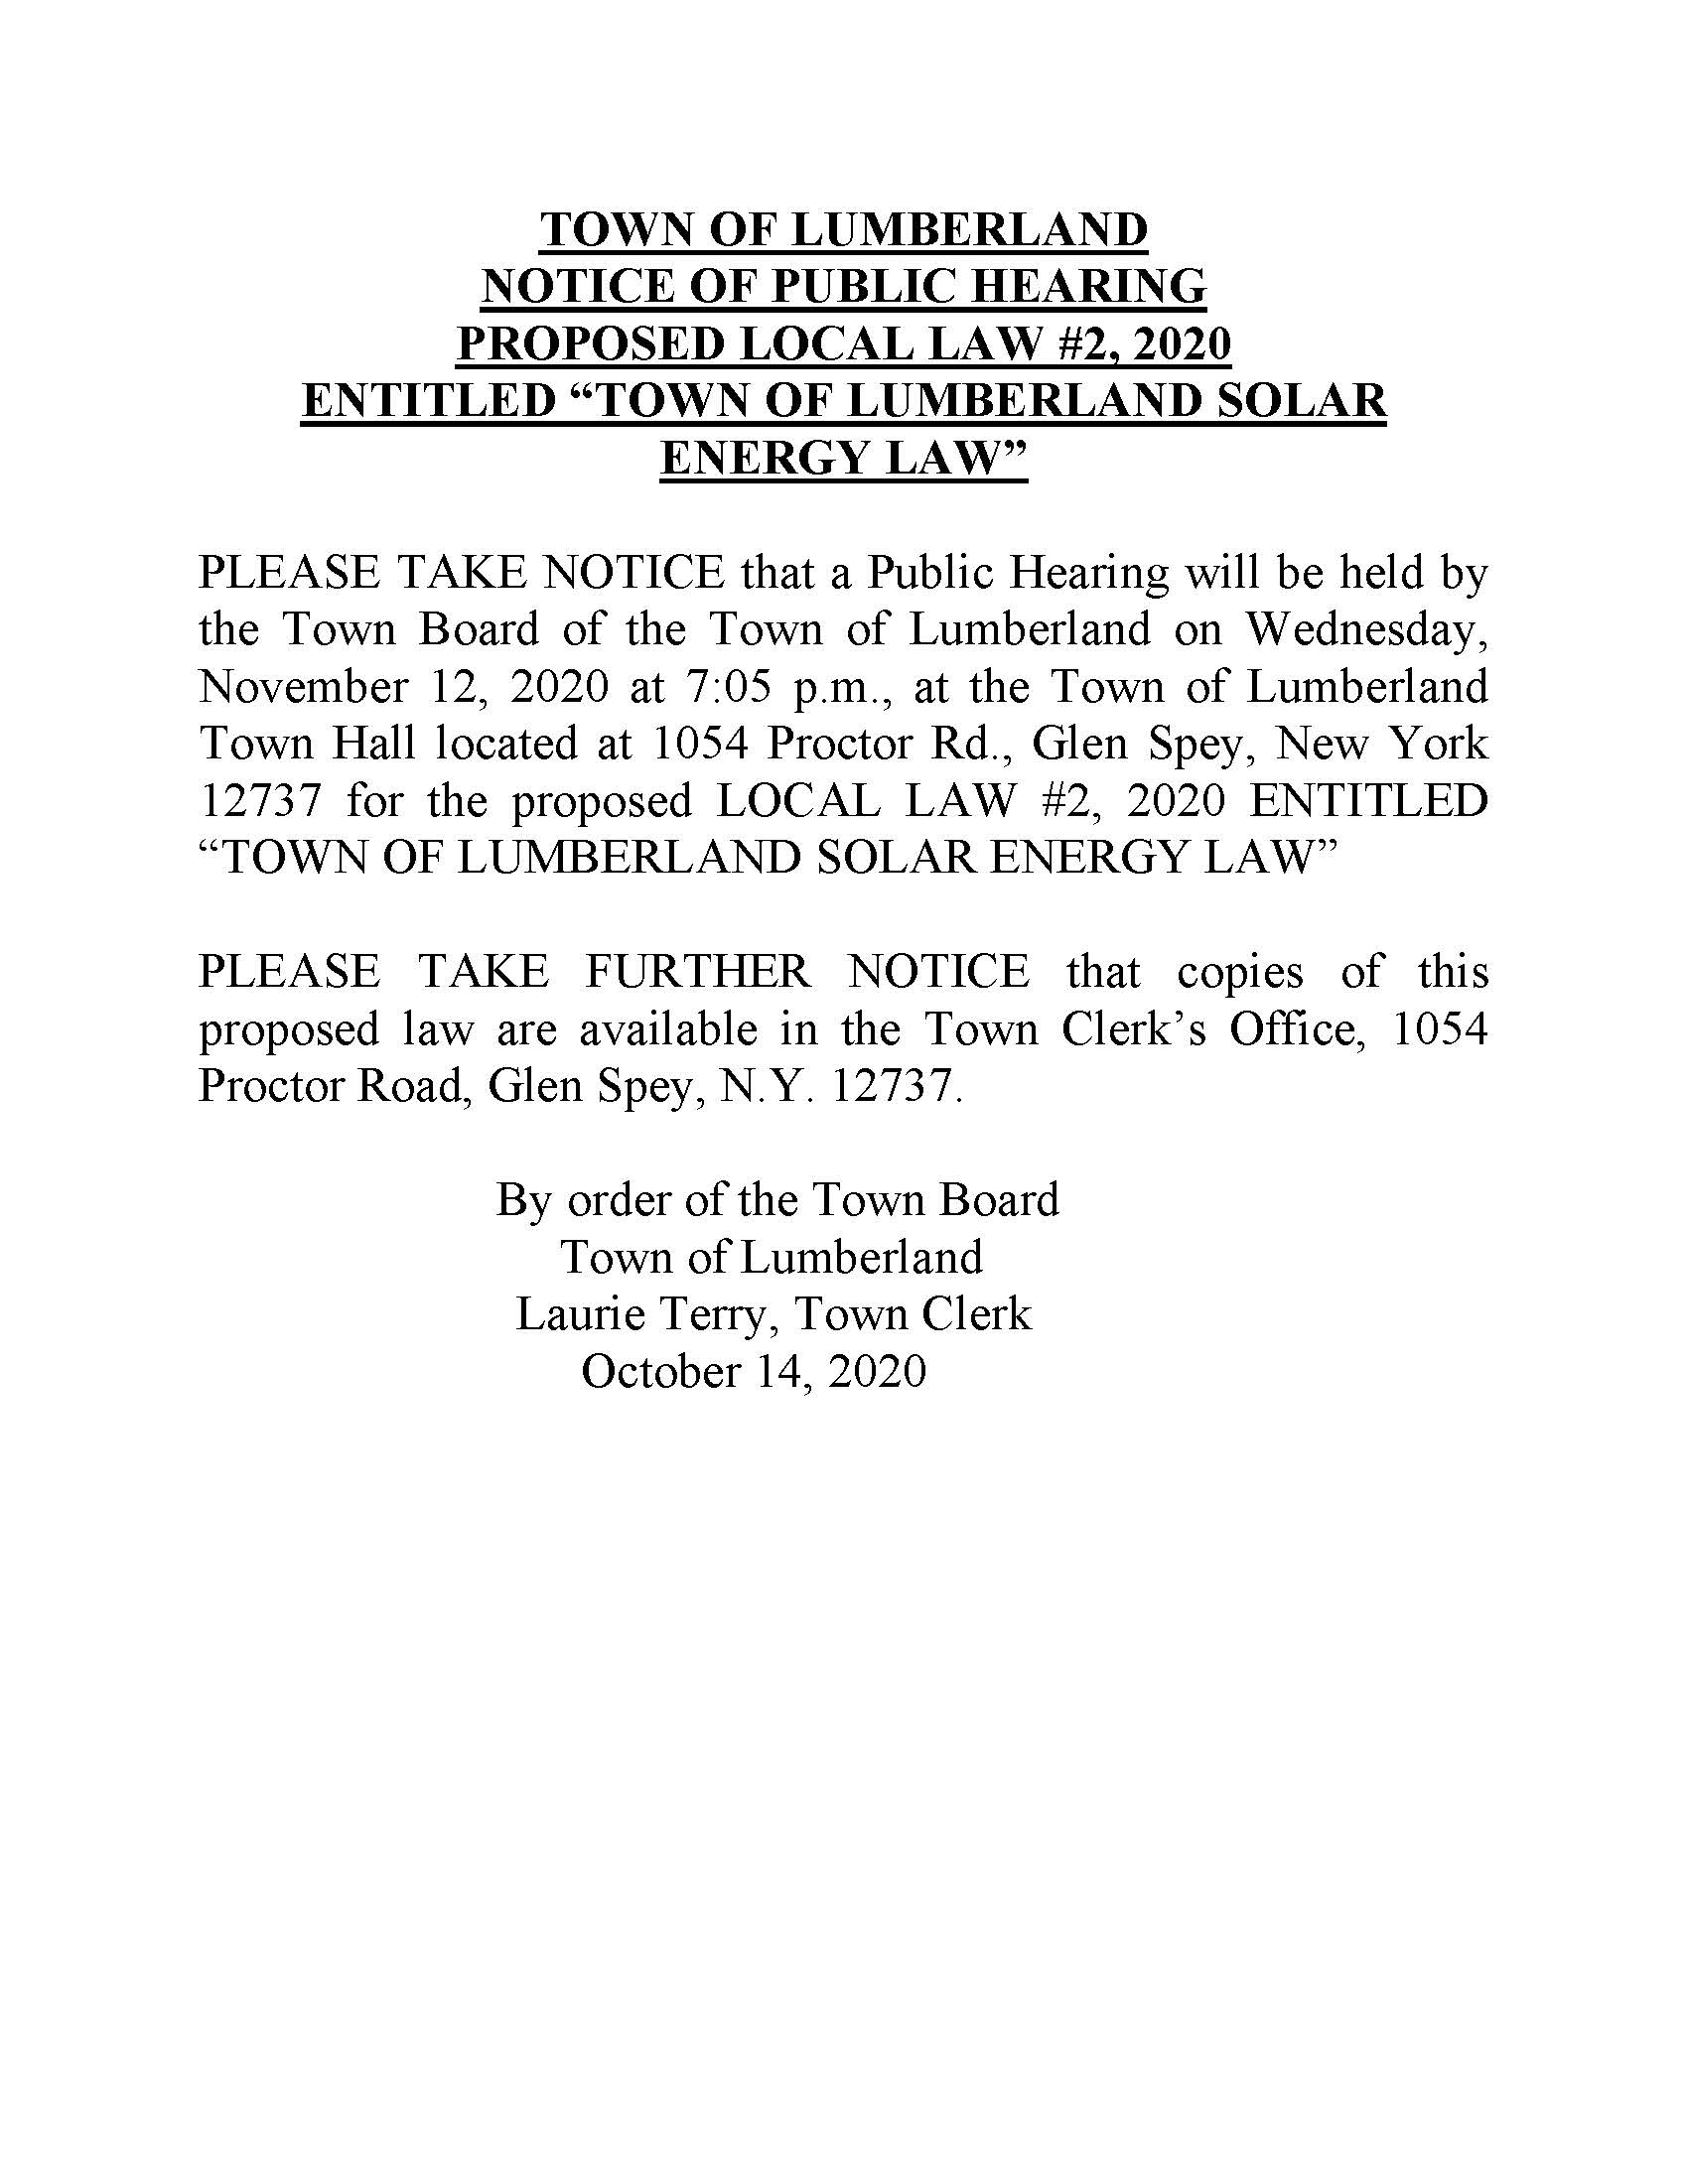 Legal Notice Public Hearing Local Law 2 of 2020